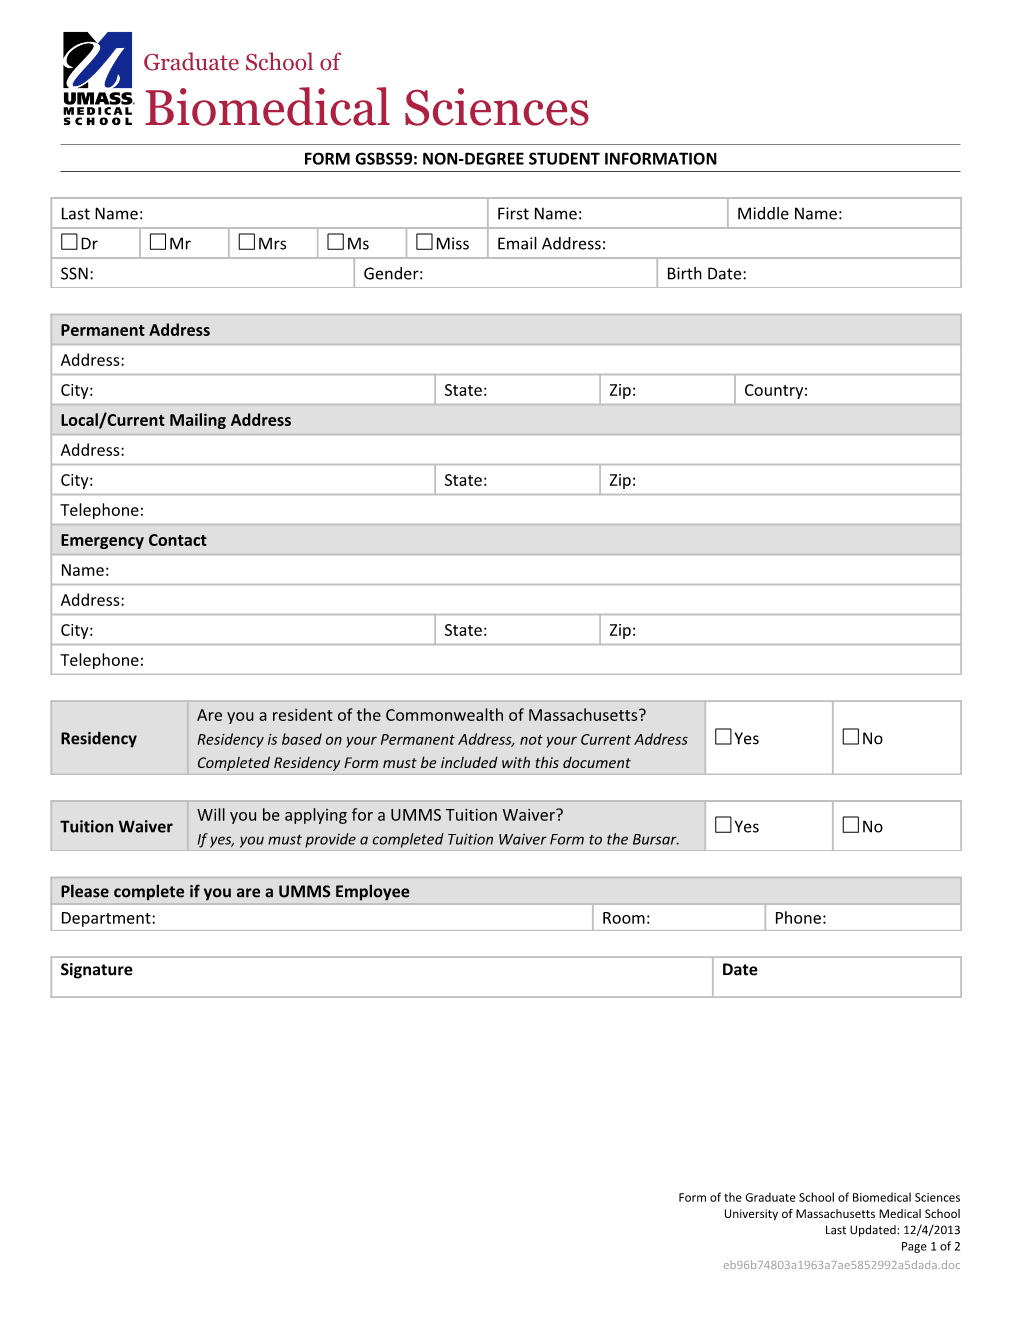 Form Gsbs59: Non-Degree Student Information